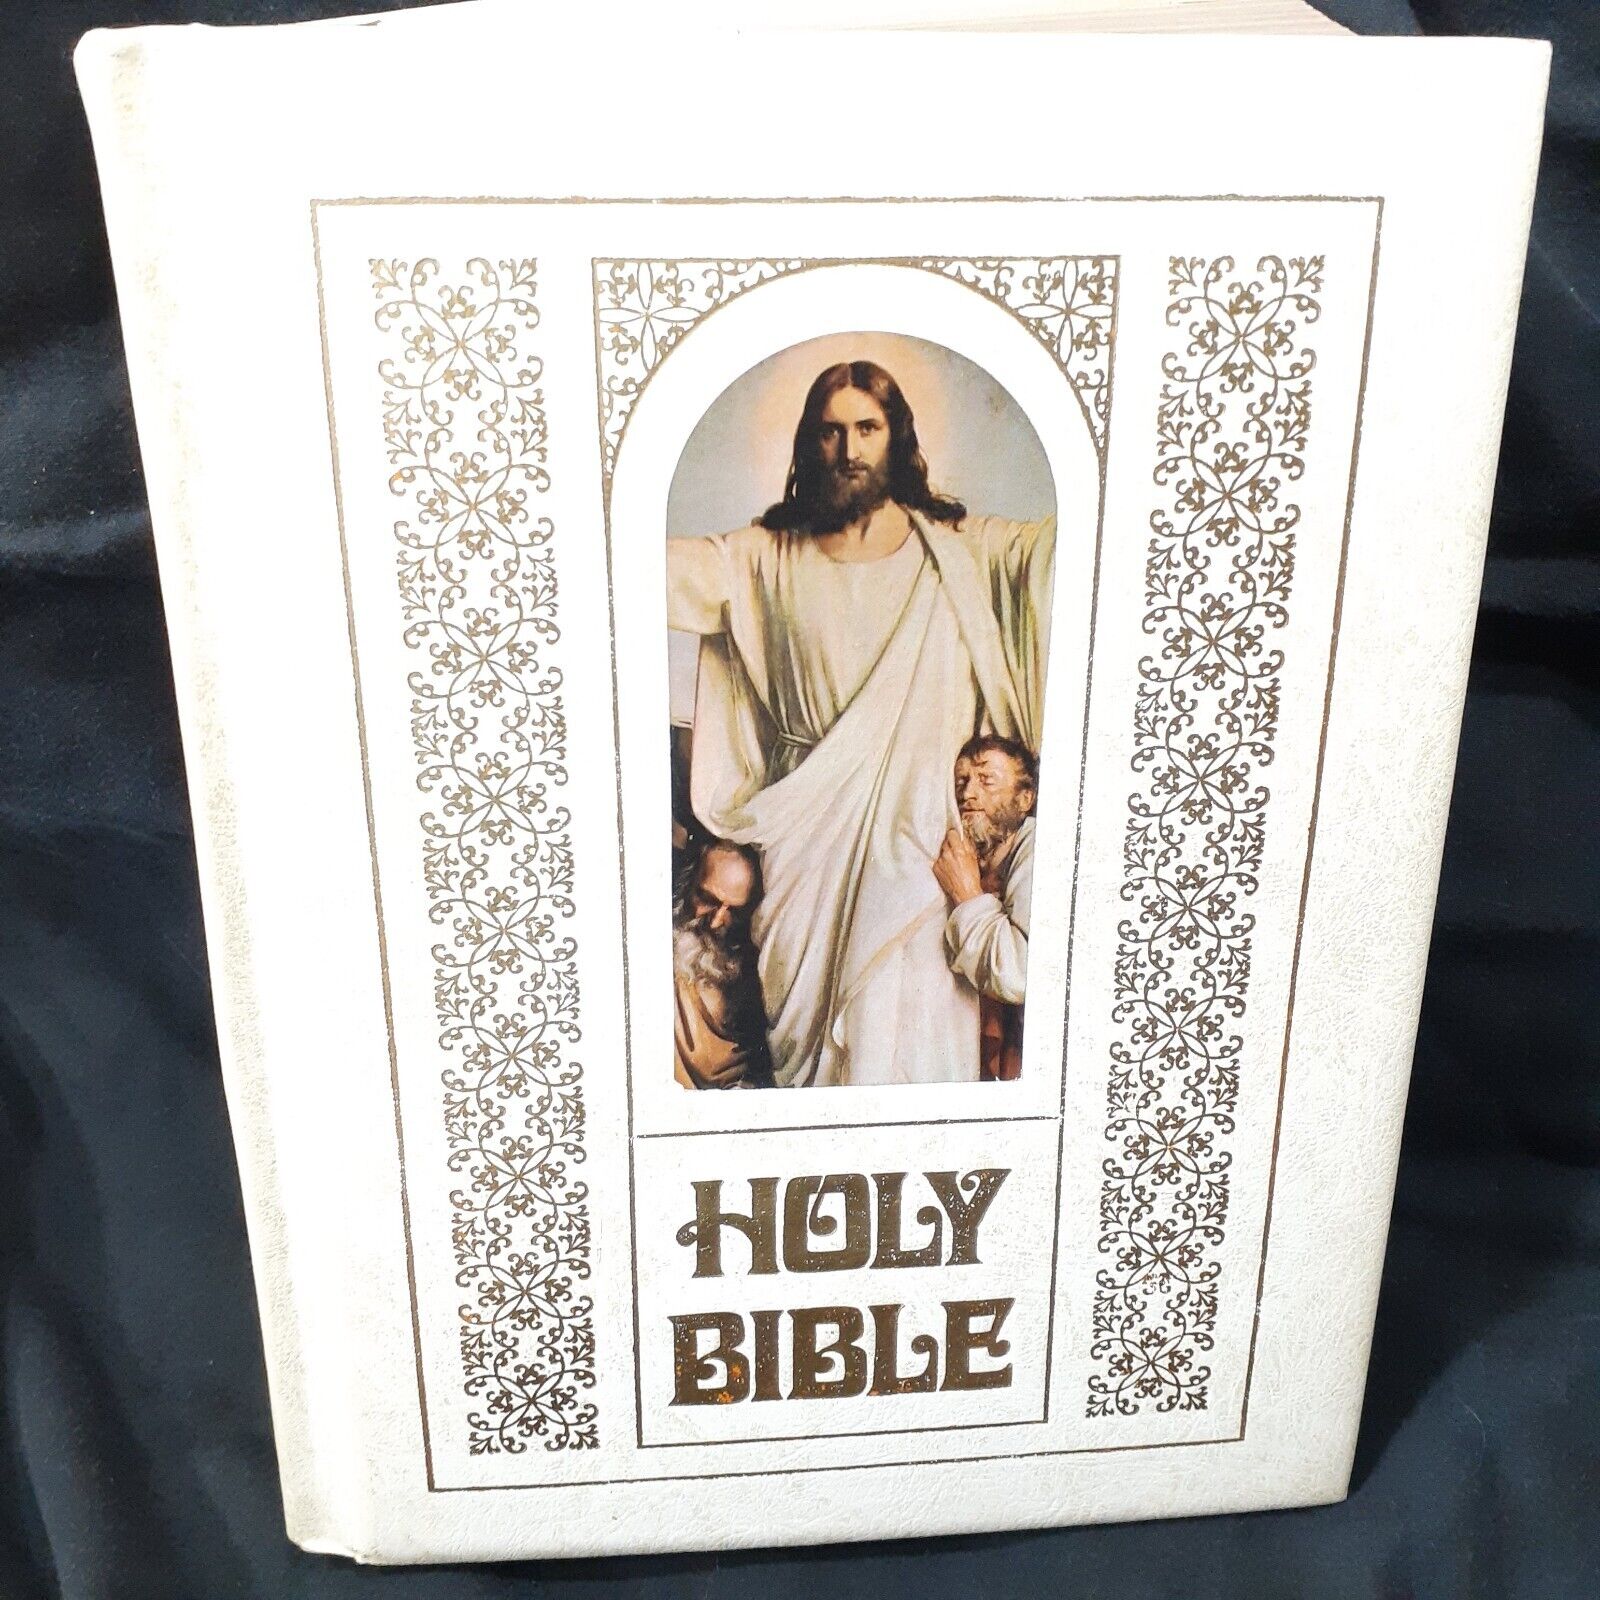 Holy Bible Gold Seal Ed KJV Master Reference Bible Family Library Reference Book